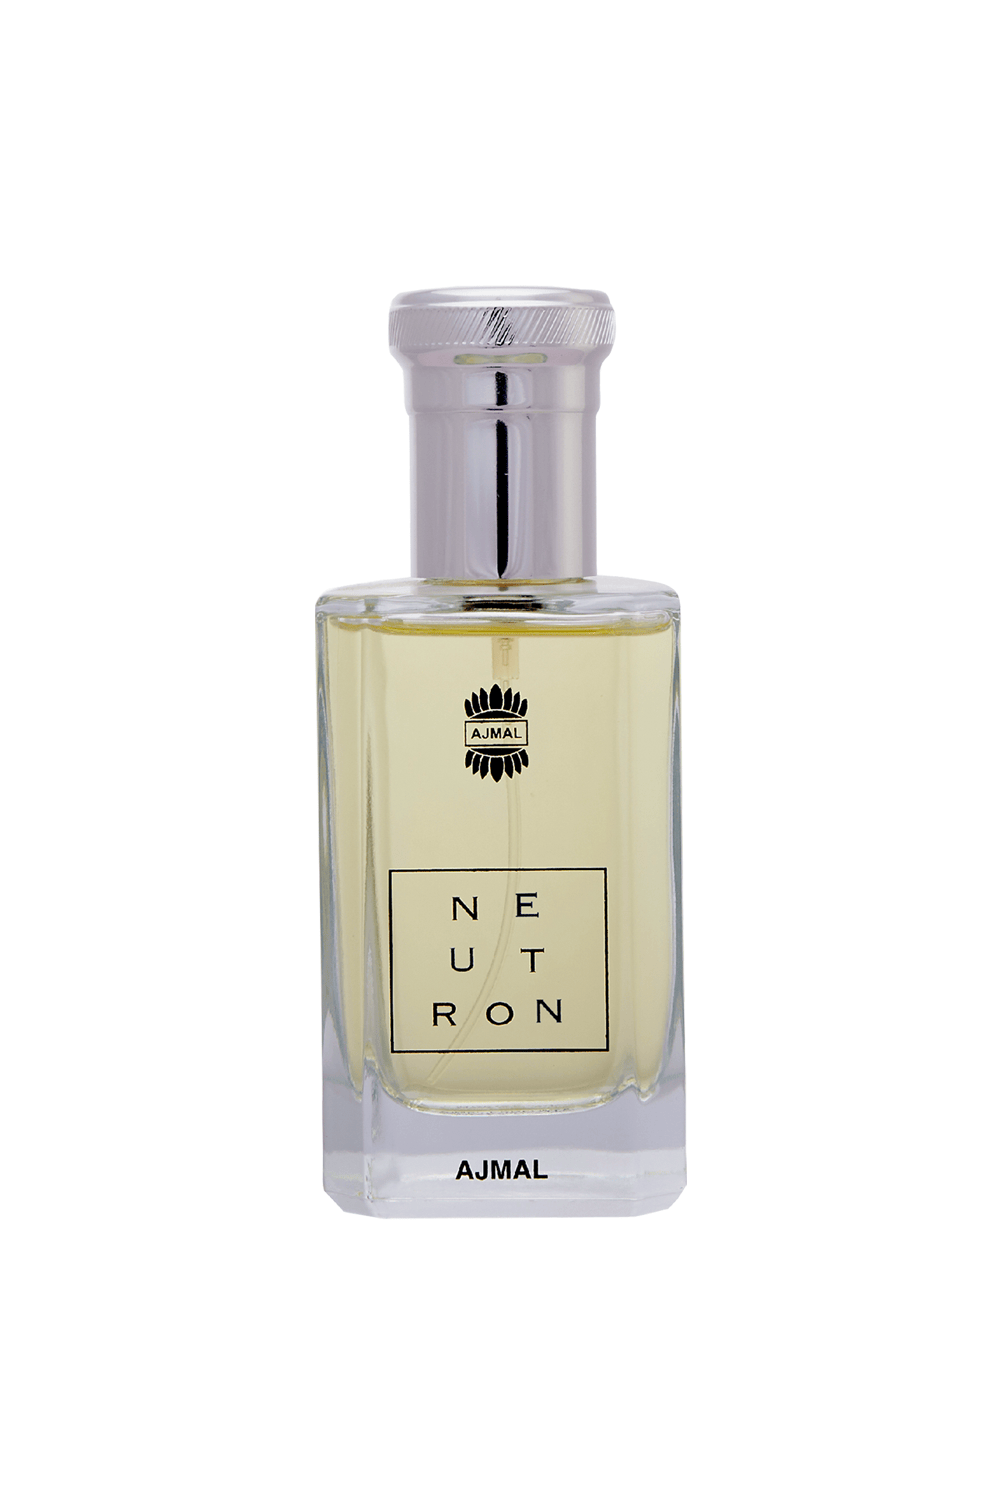 Ajmal | Ajmal Neutron EDP Citrus Fruity Perfume 100ml for Men and Tempest Concentrated Perfume Oil Floral Alcohol-free Attar 12ml for Unisex + 2 Parfum Testers FREE